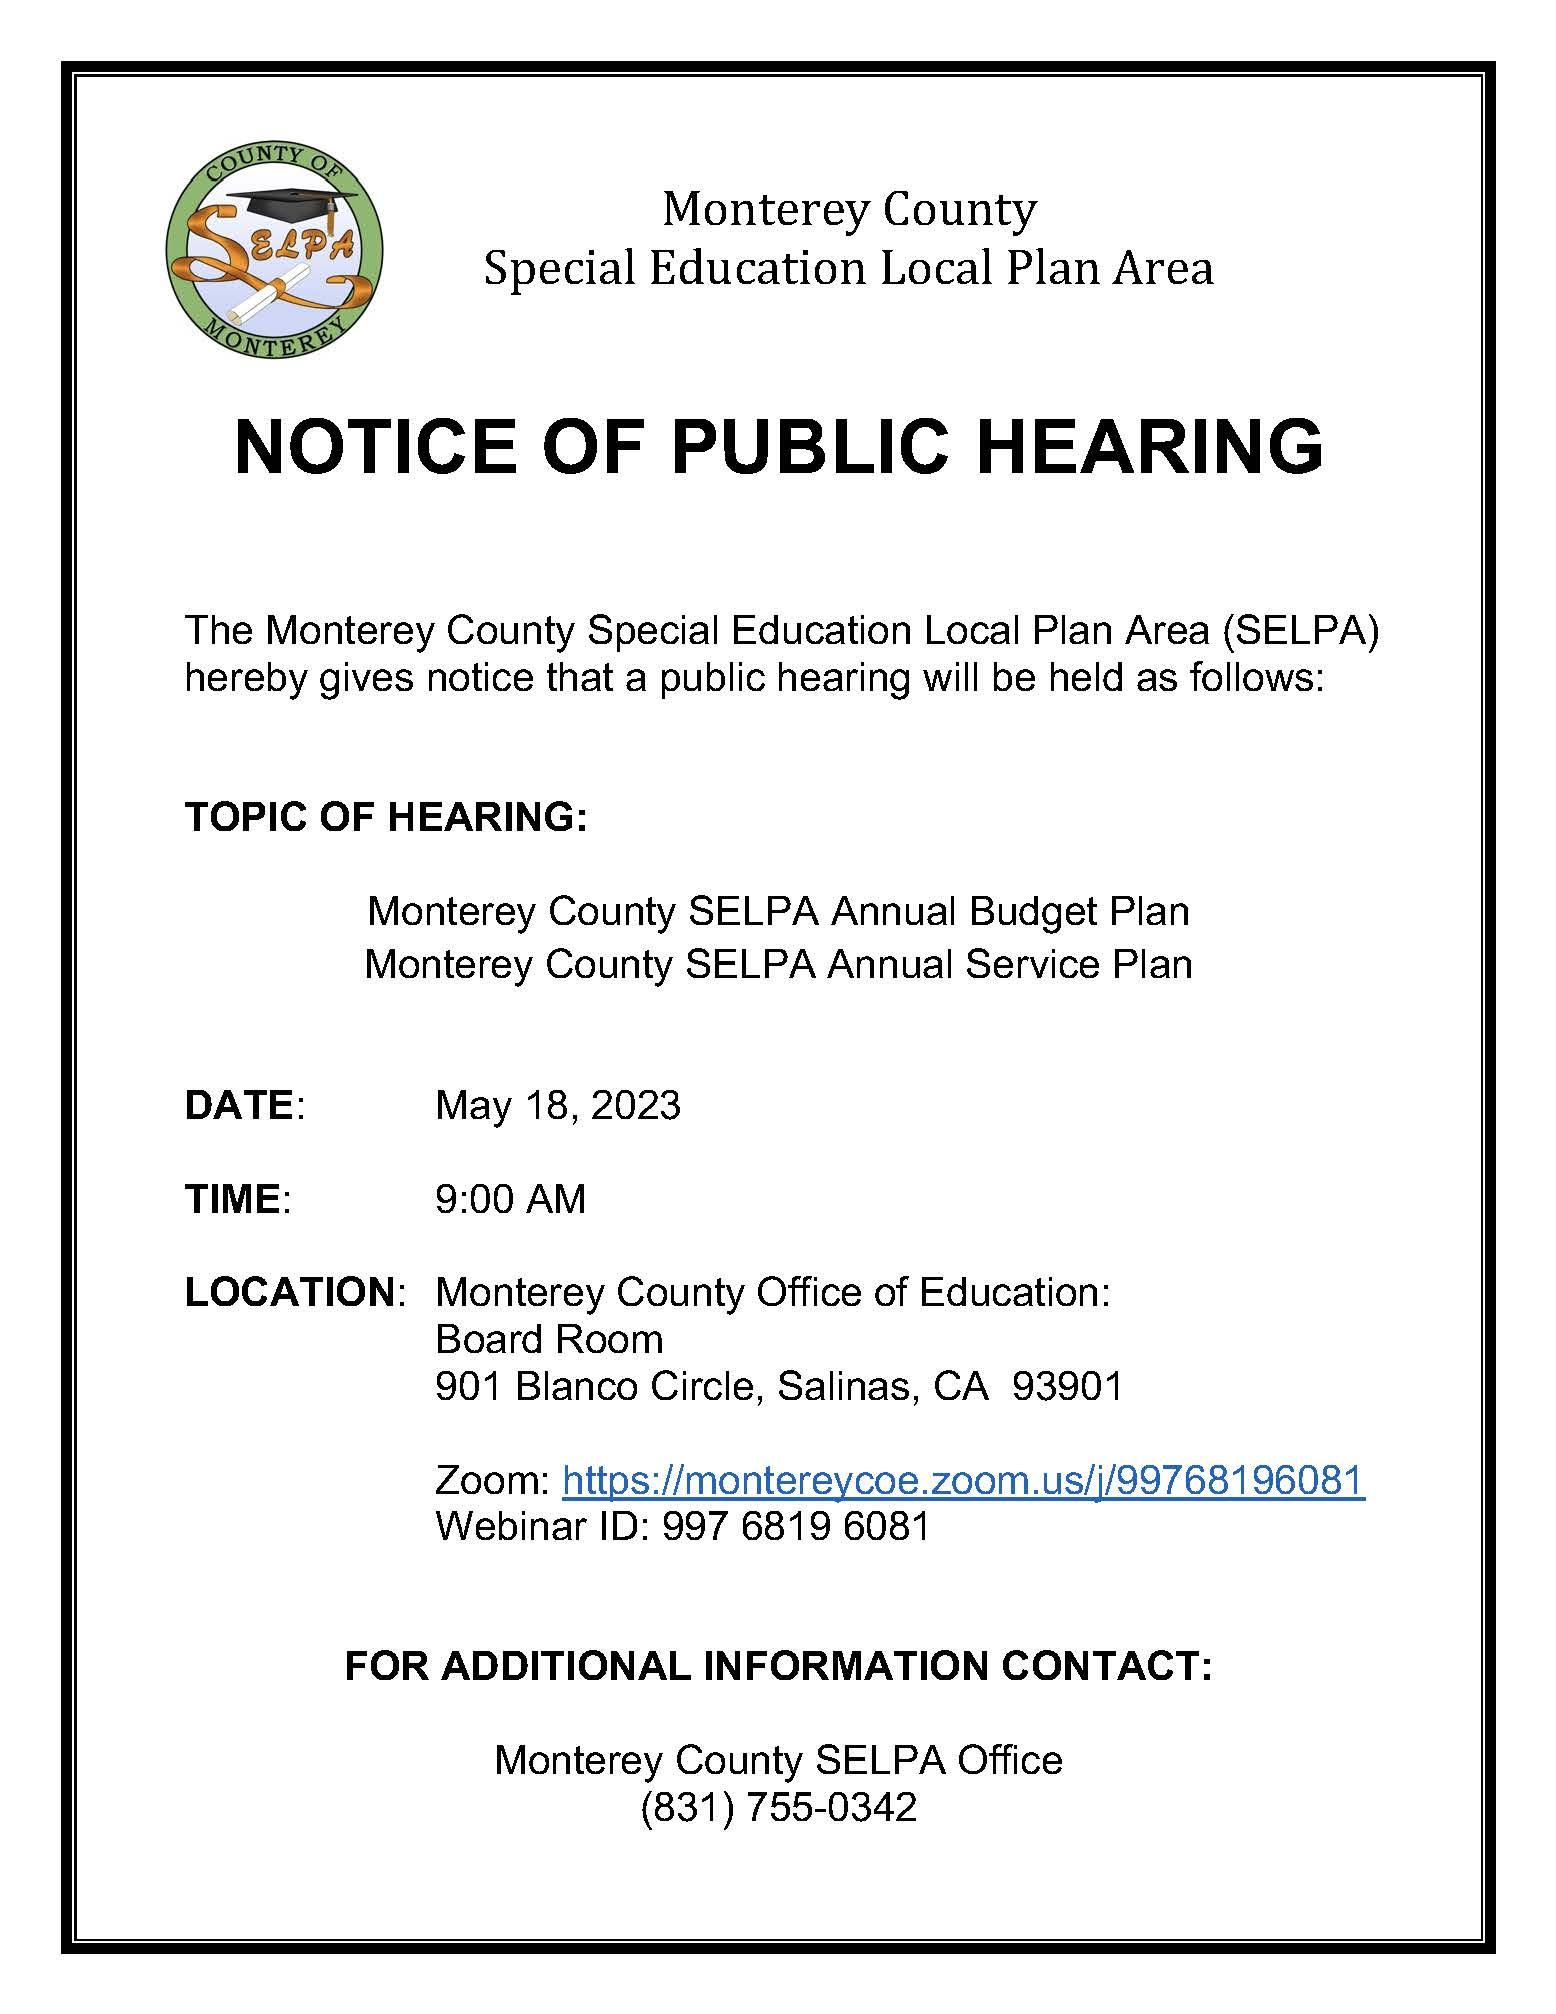 English Public Notice Hearing: The public hearing for the Monterey County SELPA Annual Budget Plan and Annual Service Plan will be held during the SELPA Governance Council meeting scheduled for May 18, 2023.  